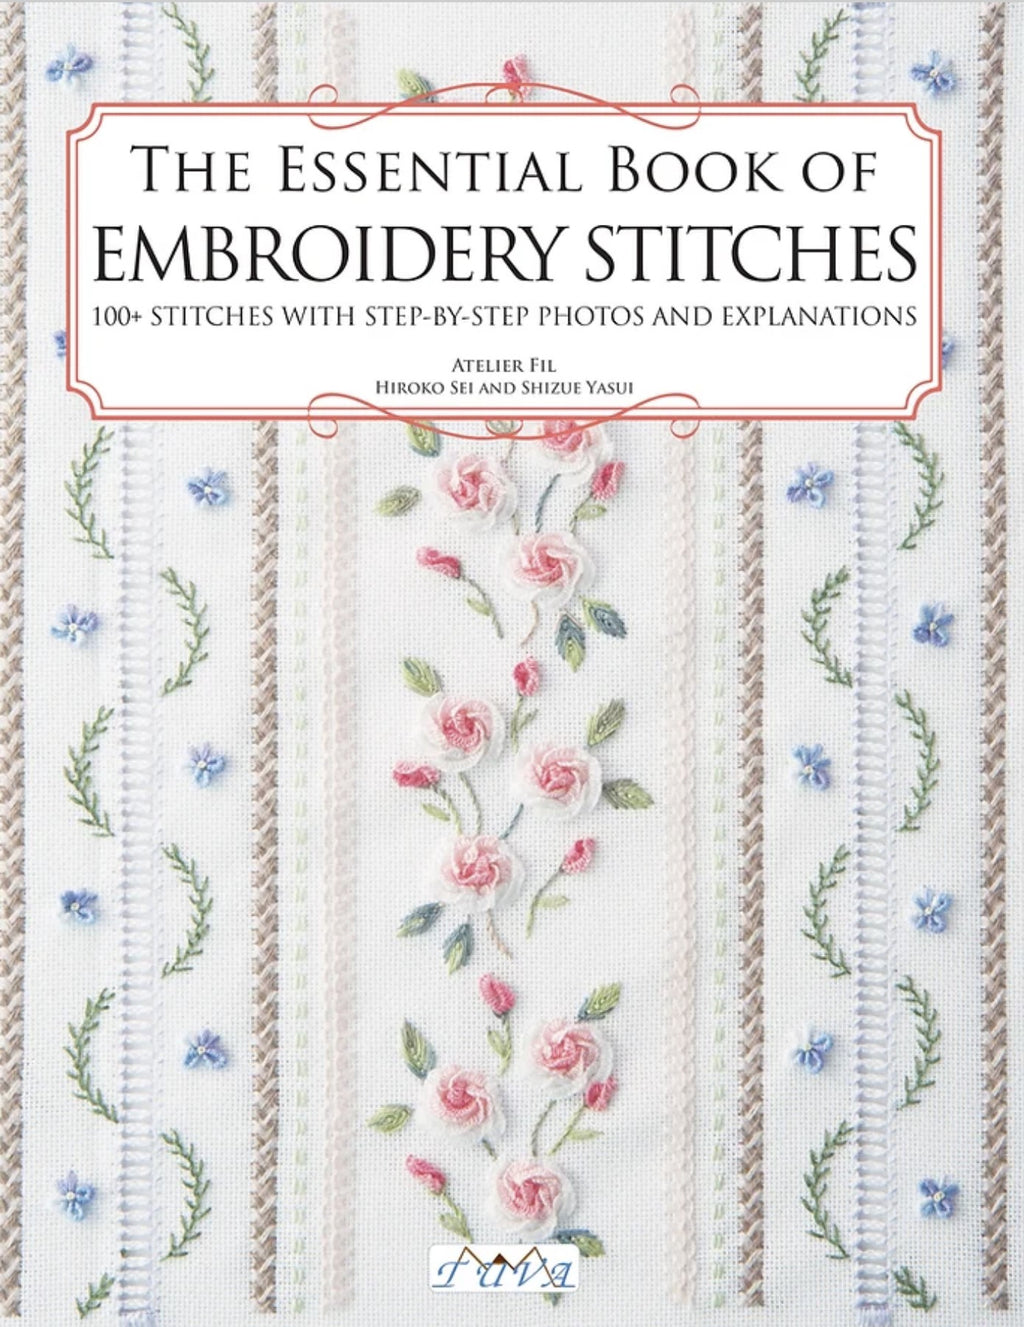 Embroidery Stitches Step-by-Step From Search Press - Books and